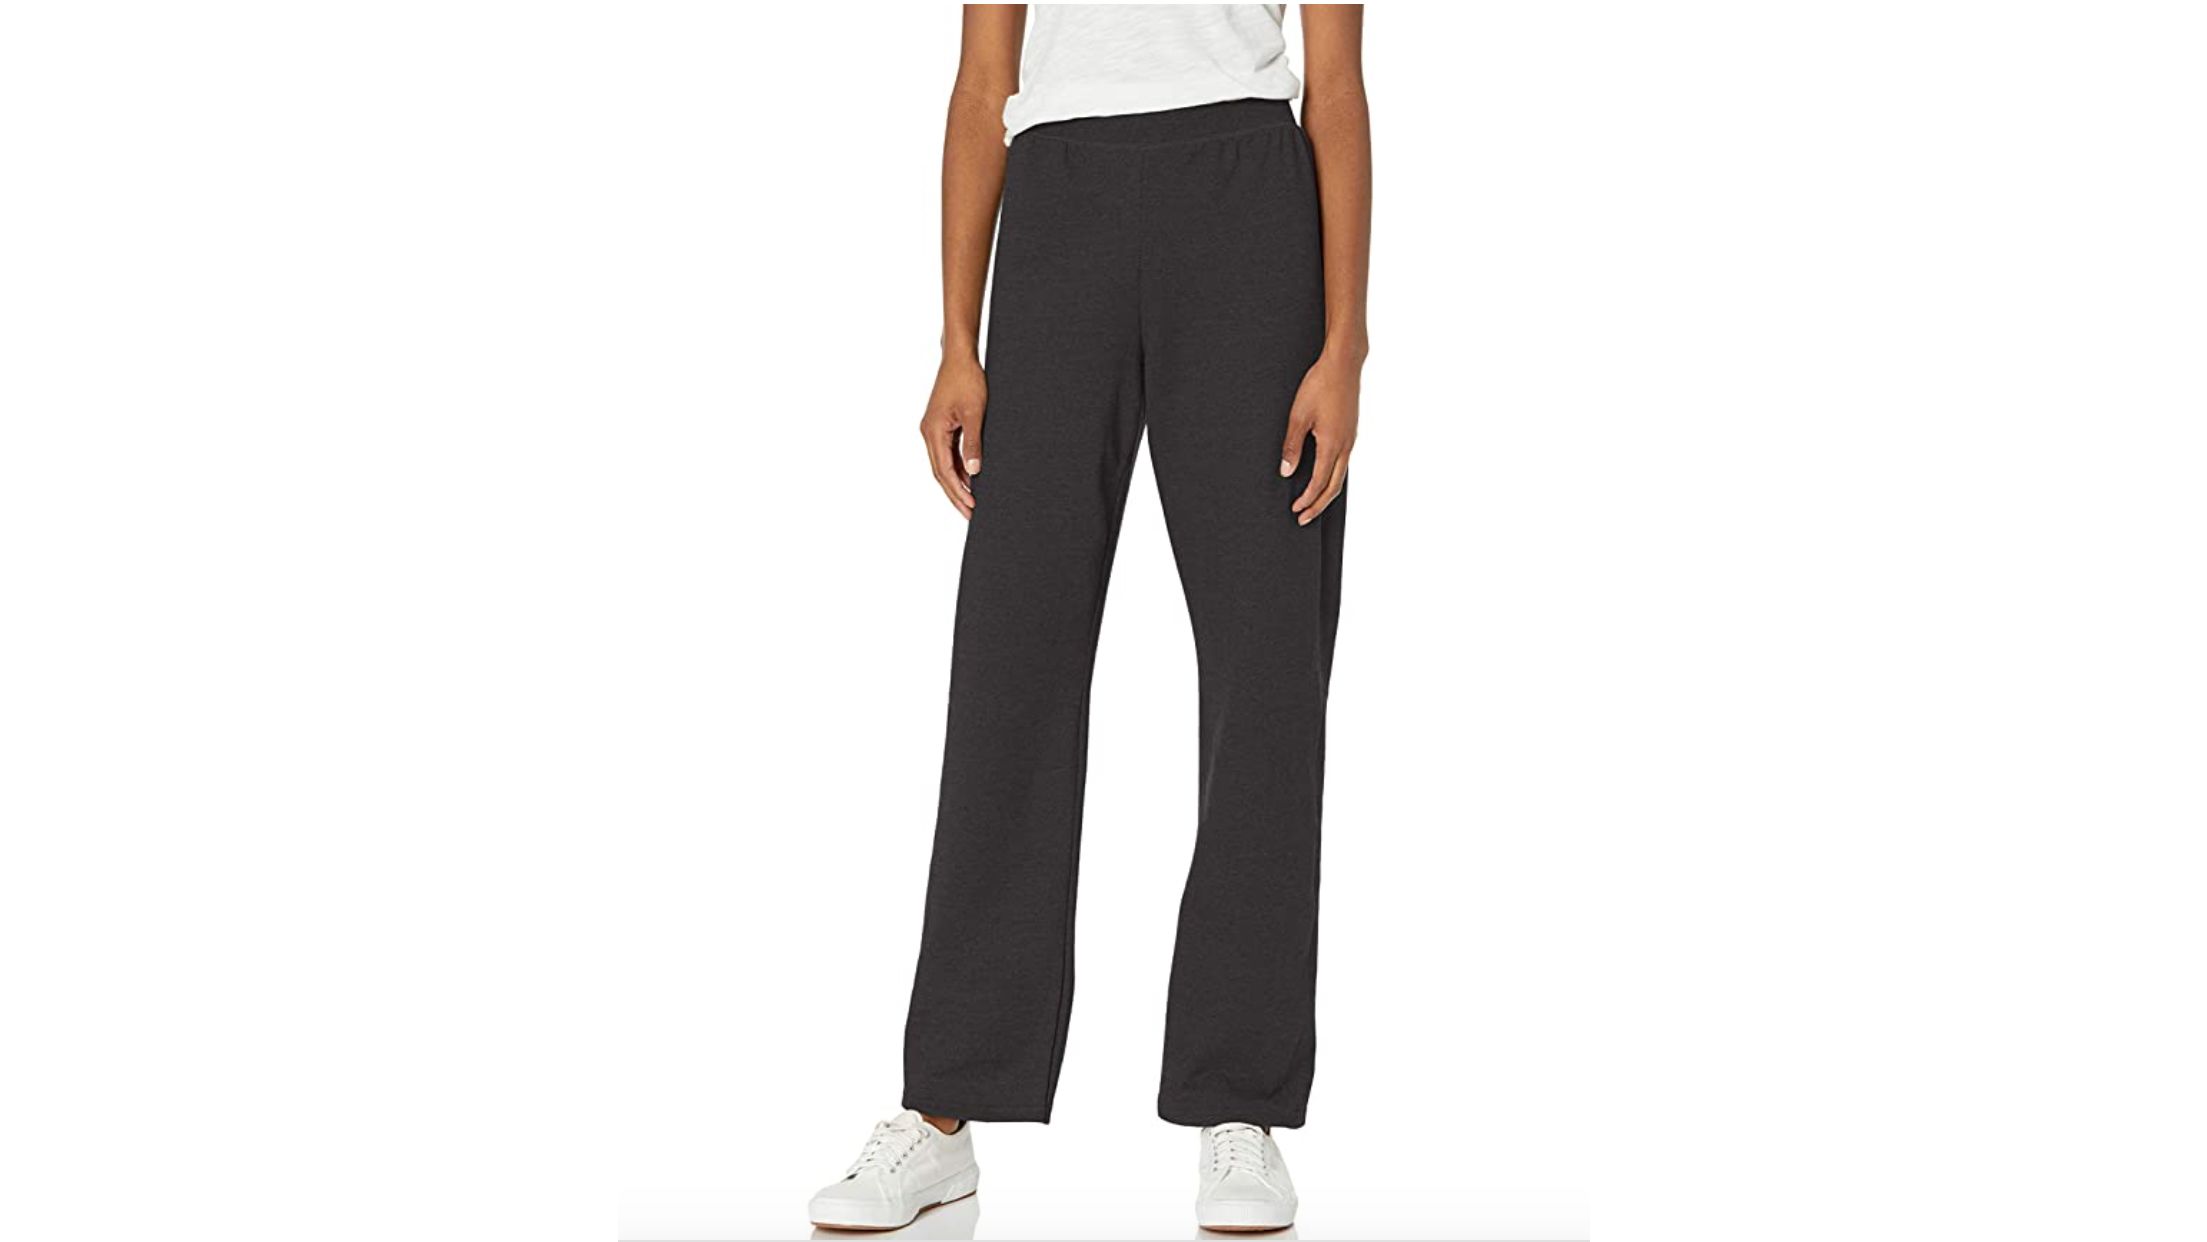 Hanes Women's French Terry Pocket Pant  Pants for women, Pocket pants,  Comfortable loungewear